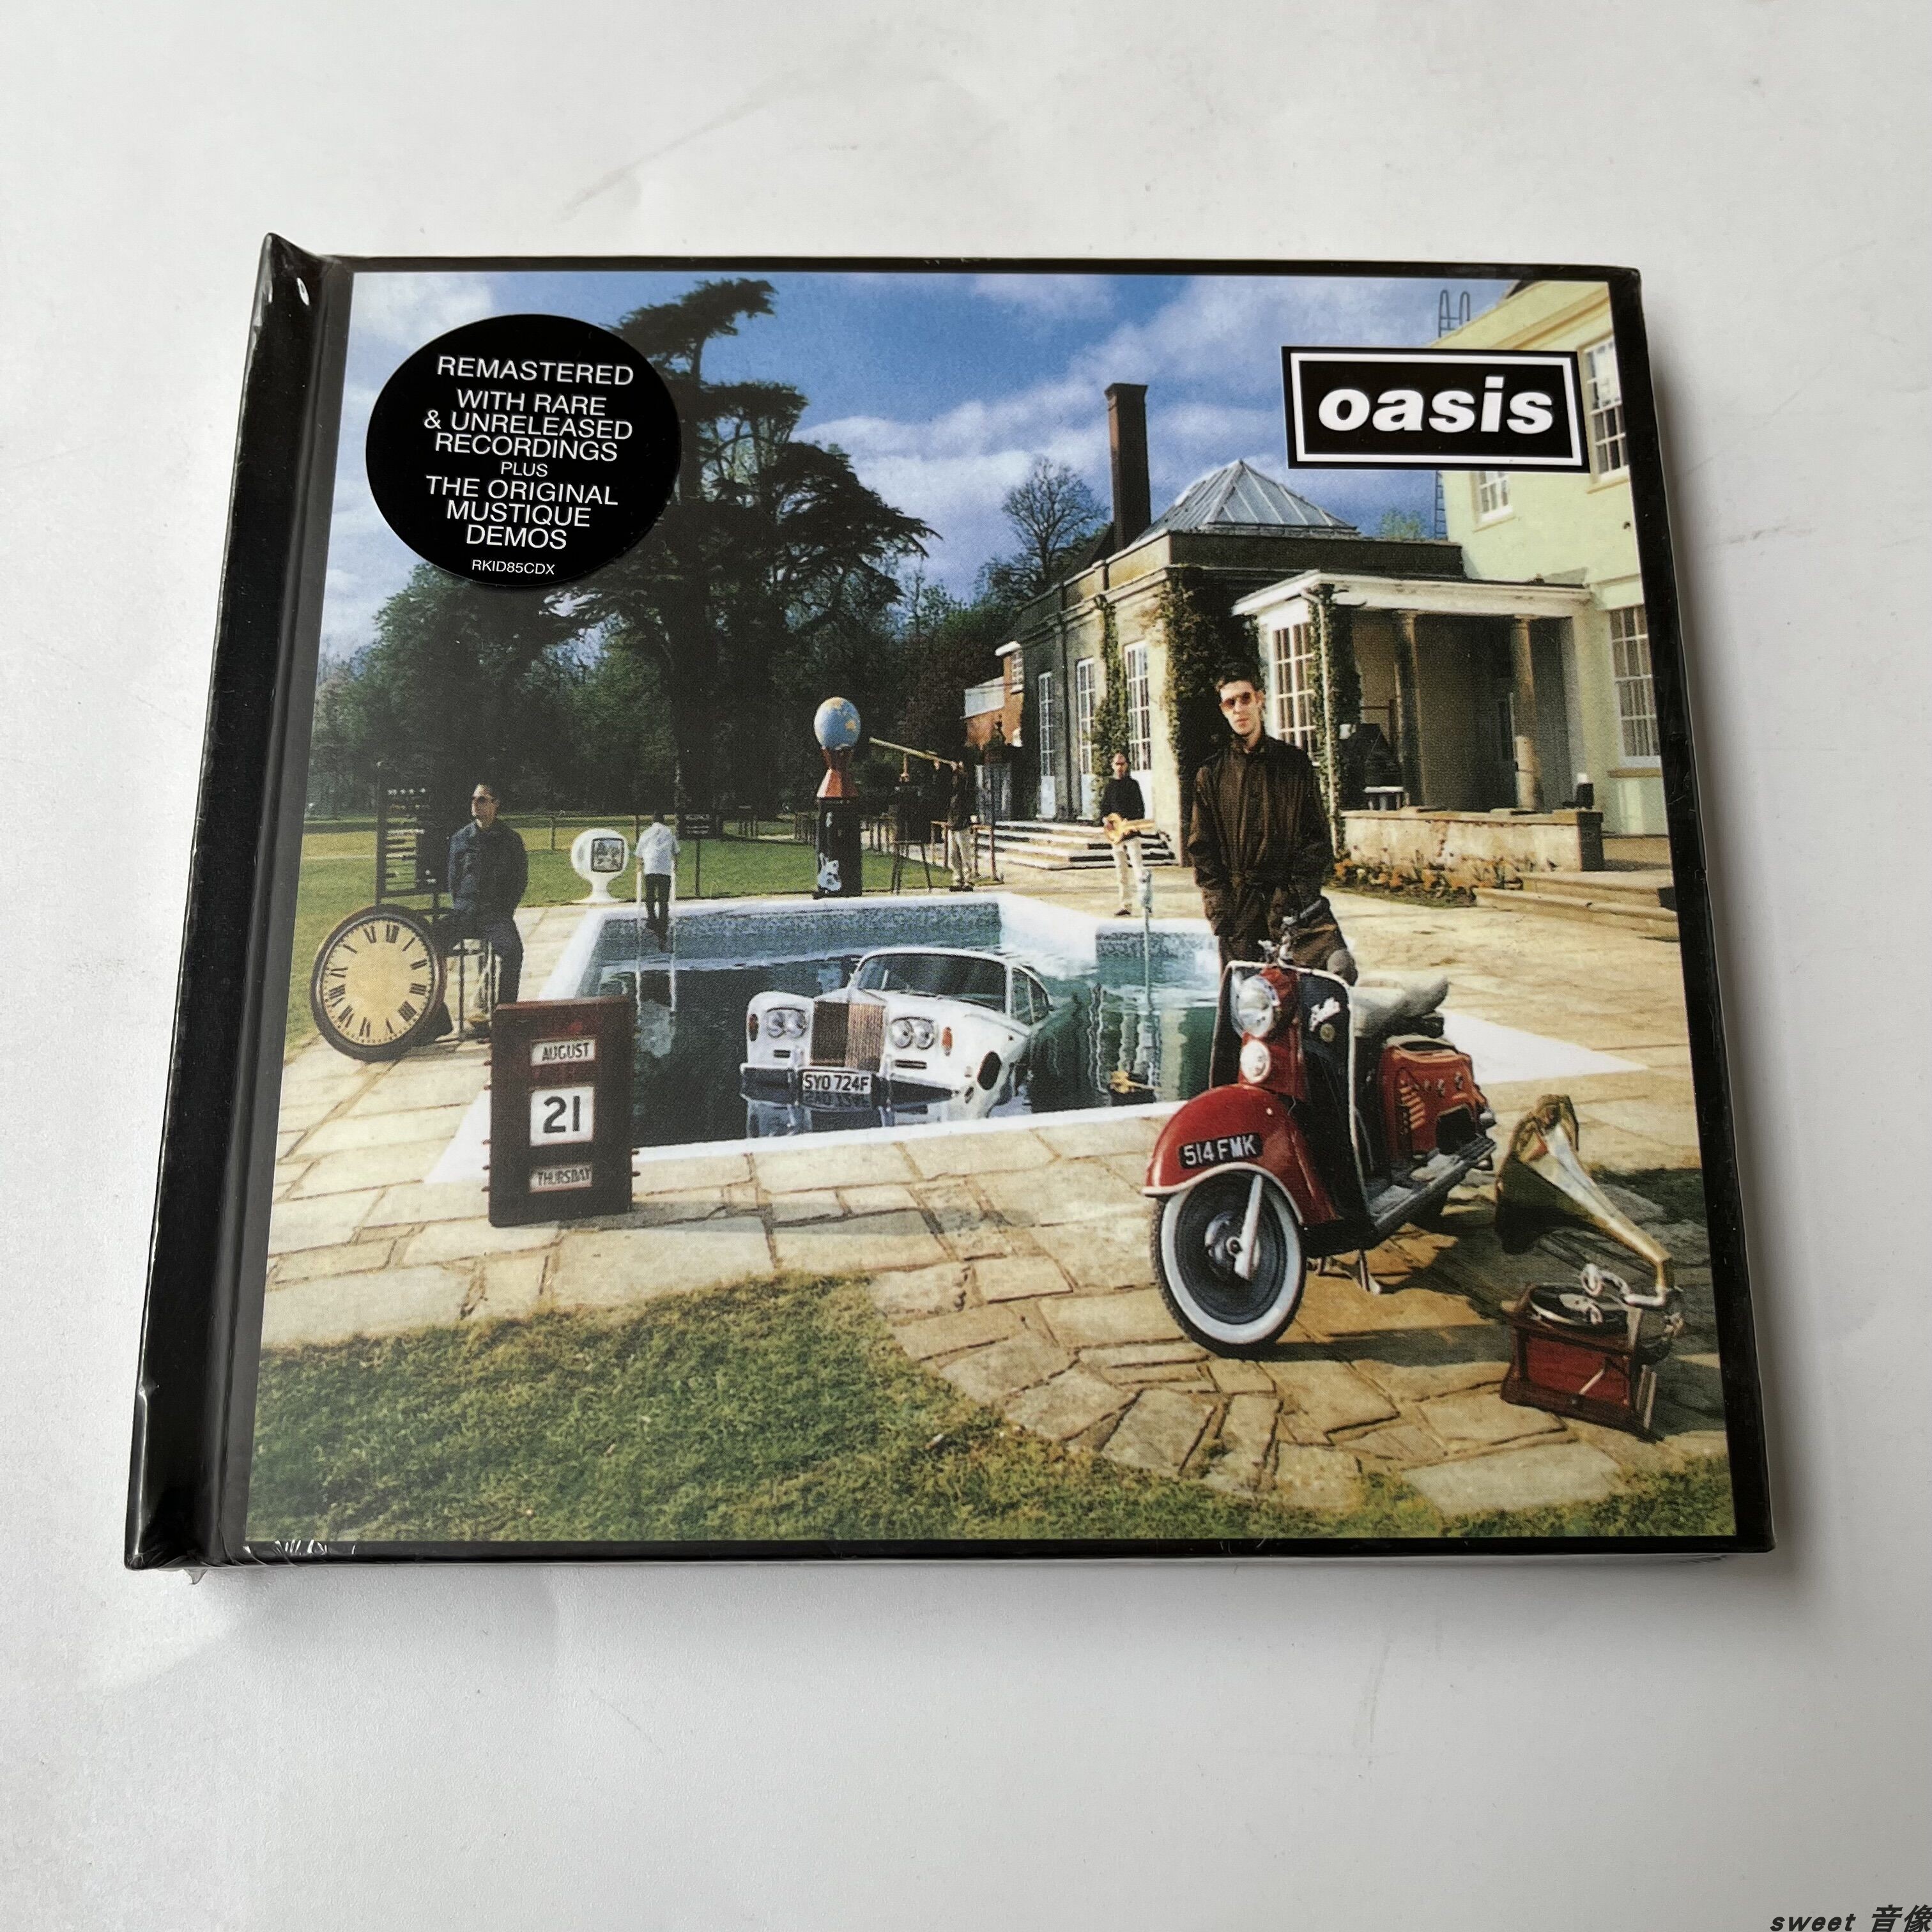  CD OASIS BE HERE NOW 3CD Ŭ ٹ ÷-